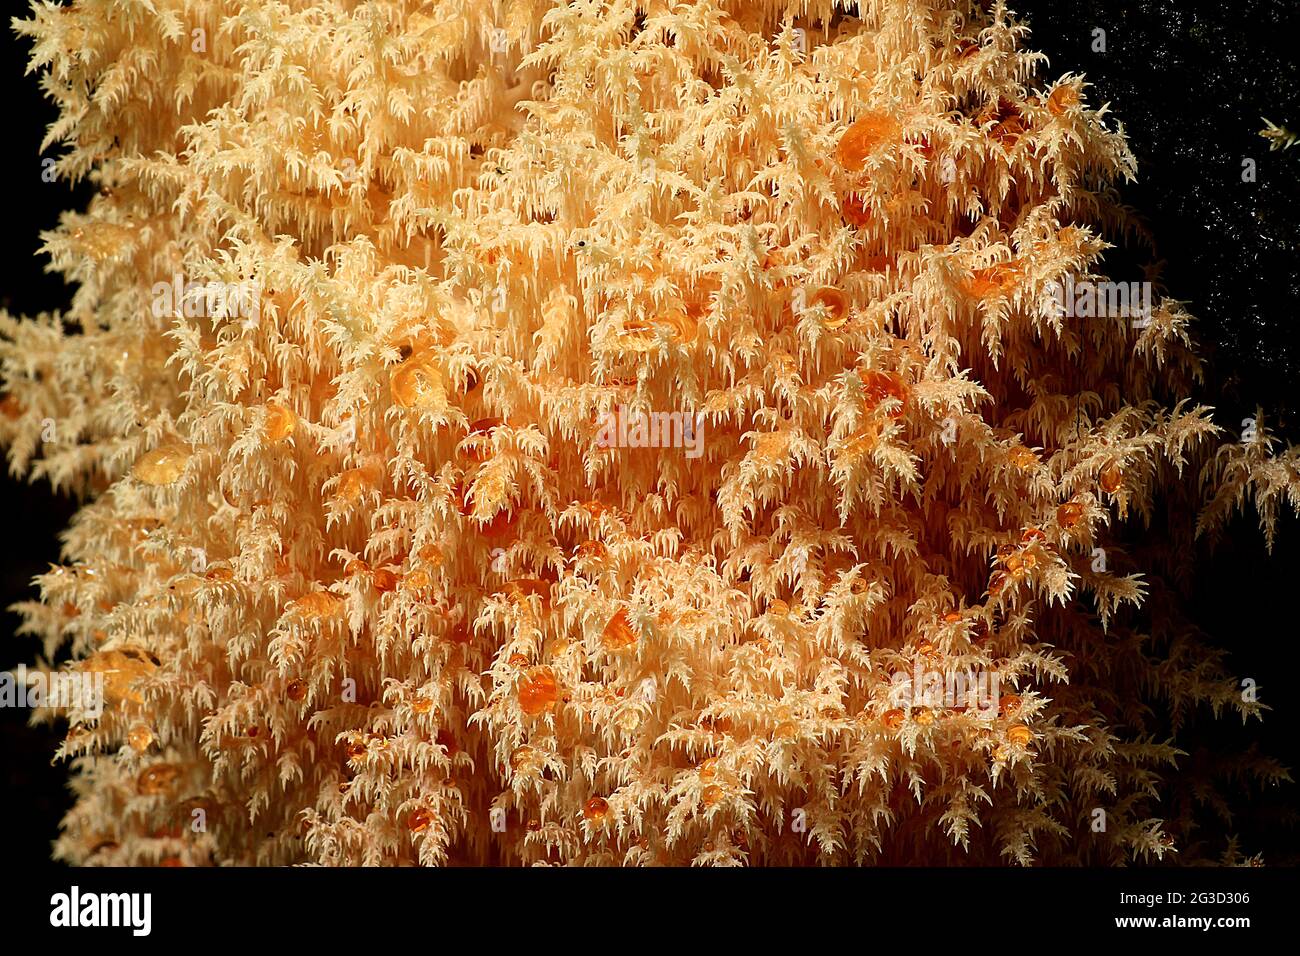 Coral tooth fungus (Hericium coralloides) Stock Photo